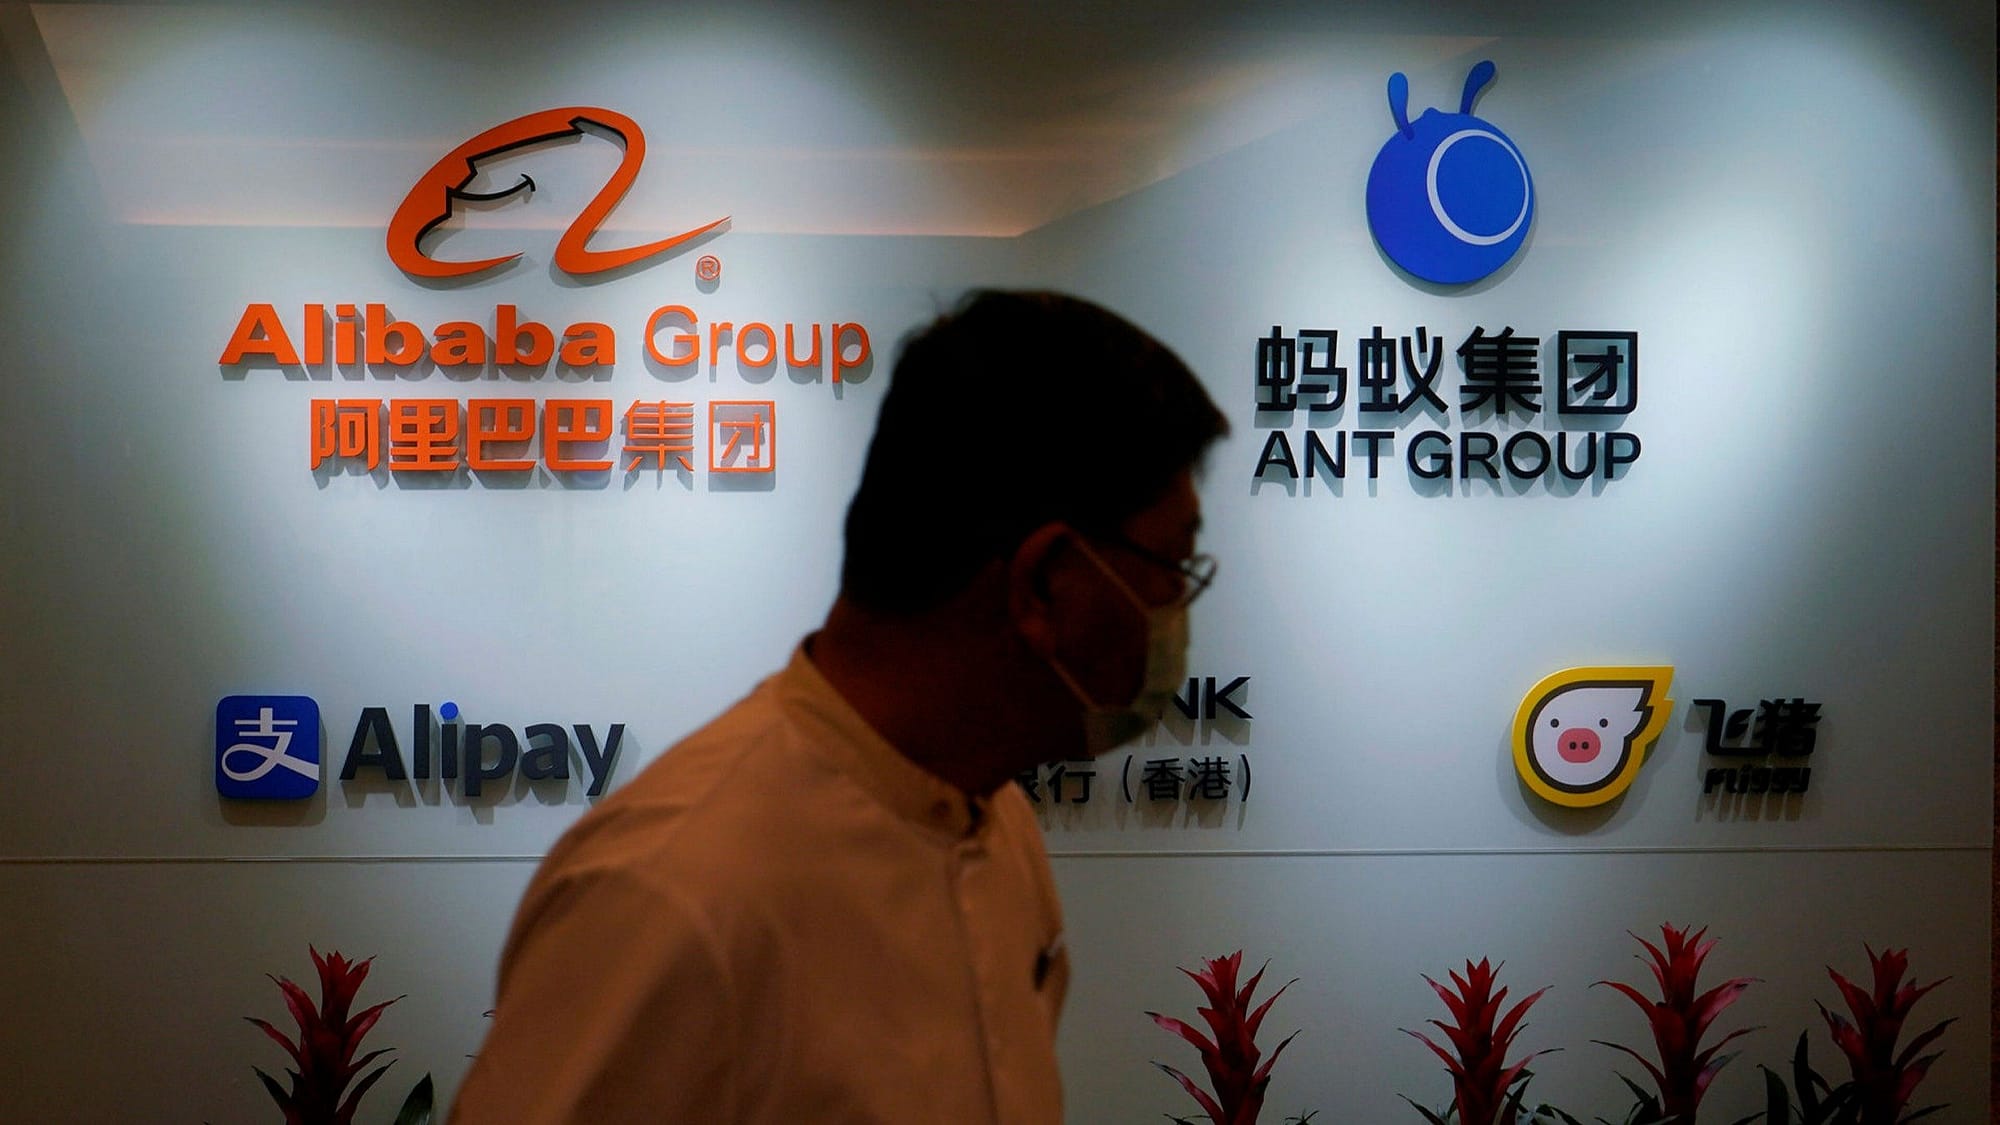 ant group ipo was suspended